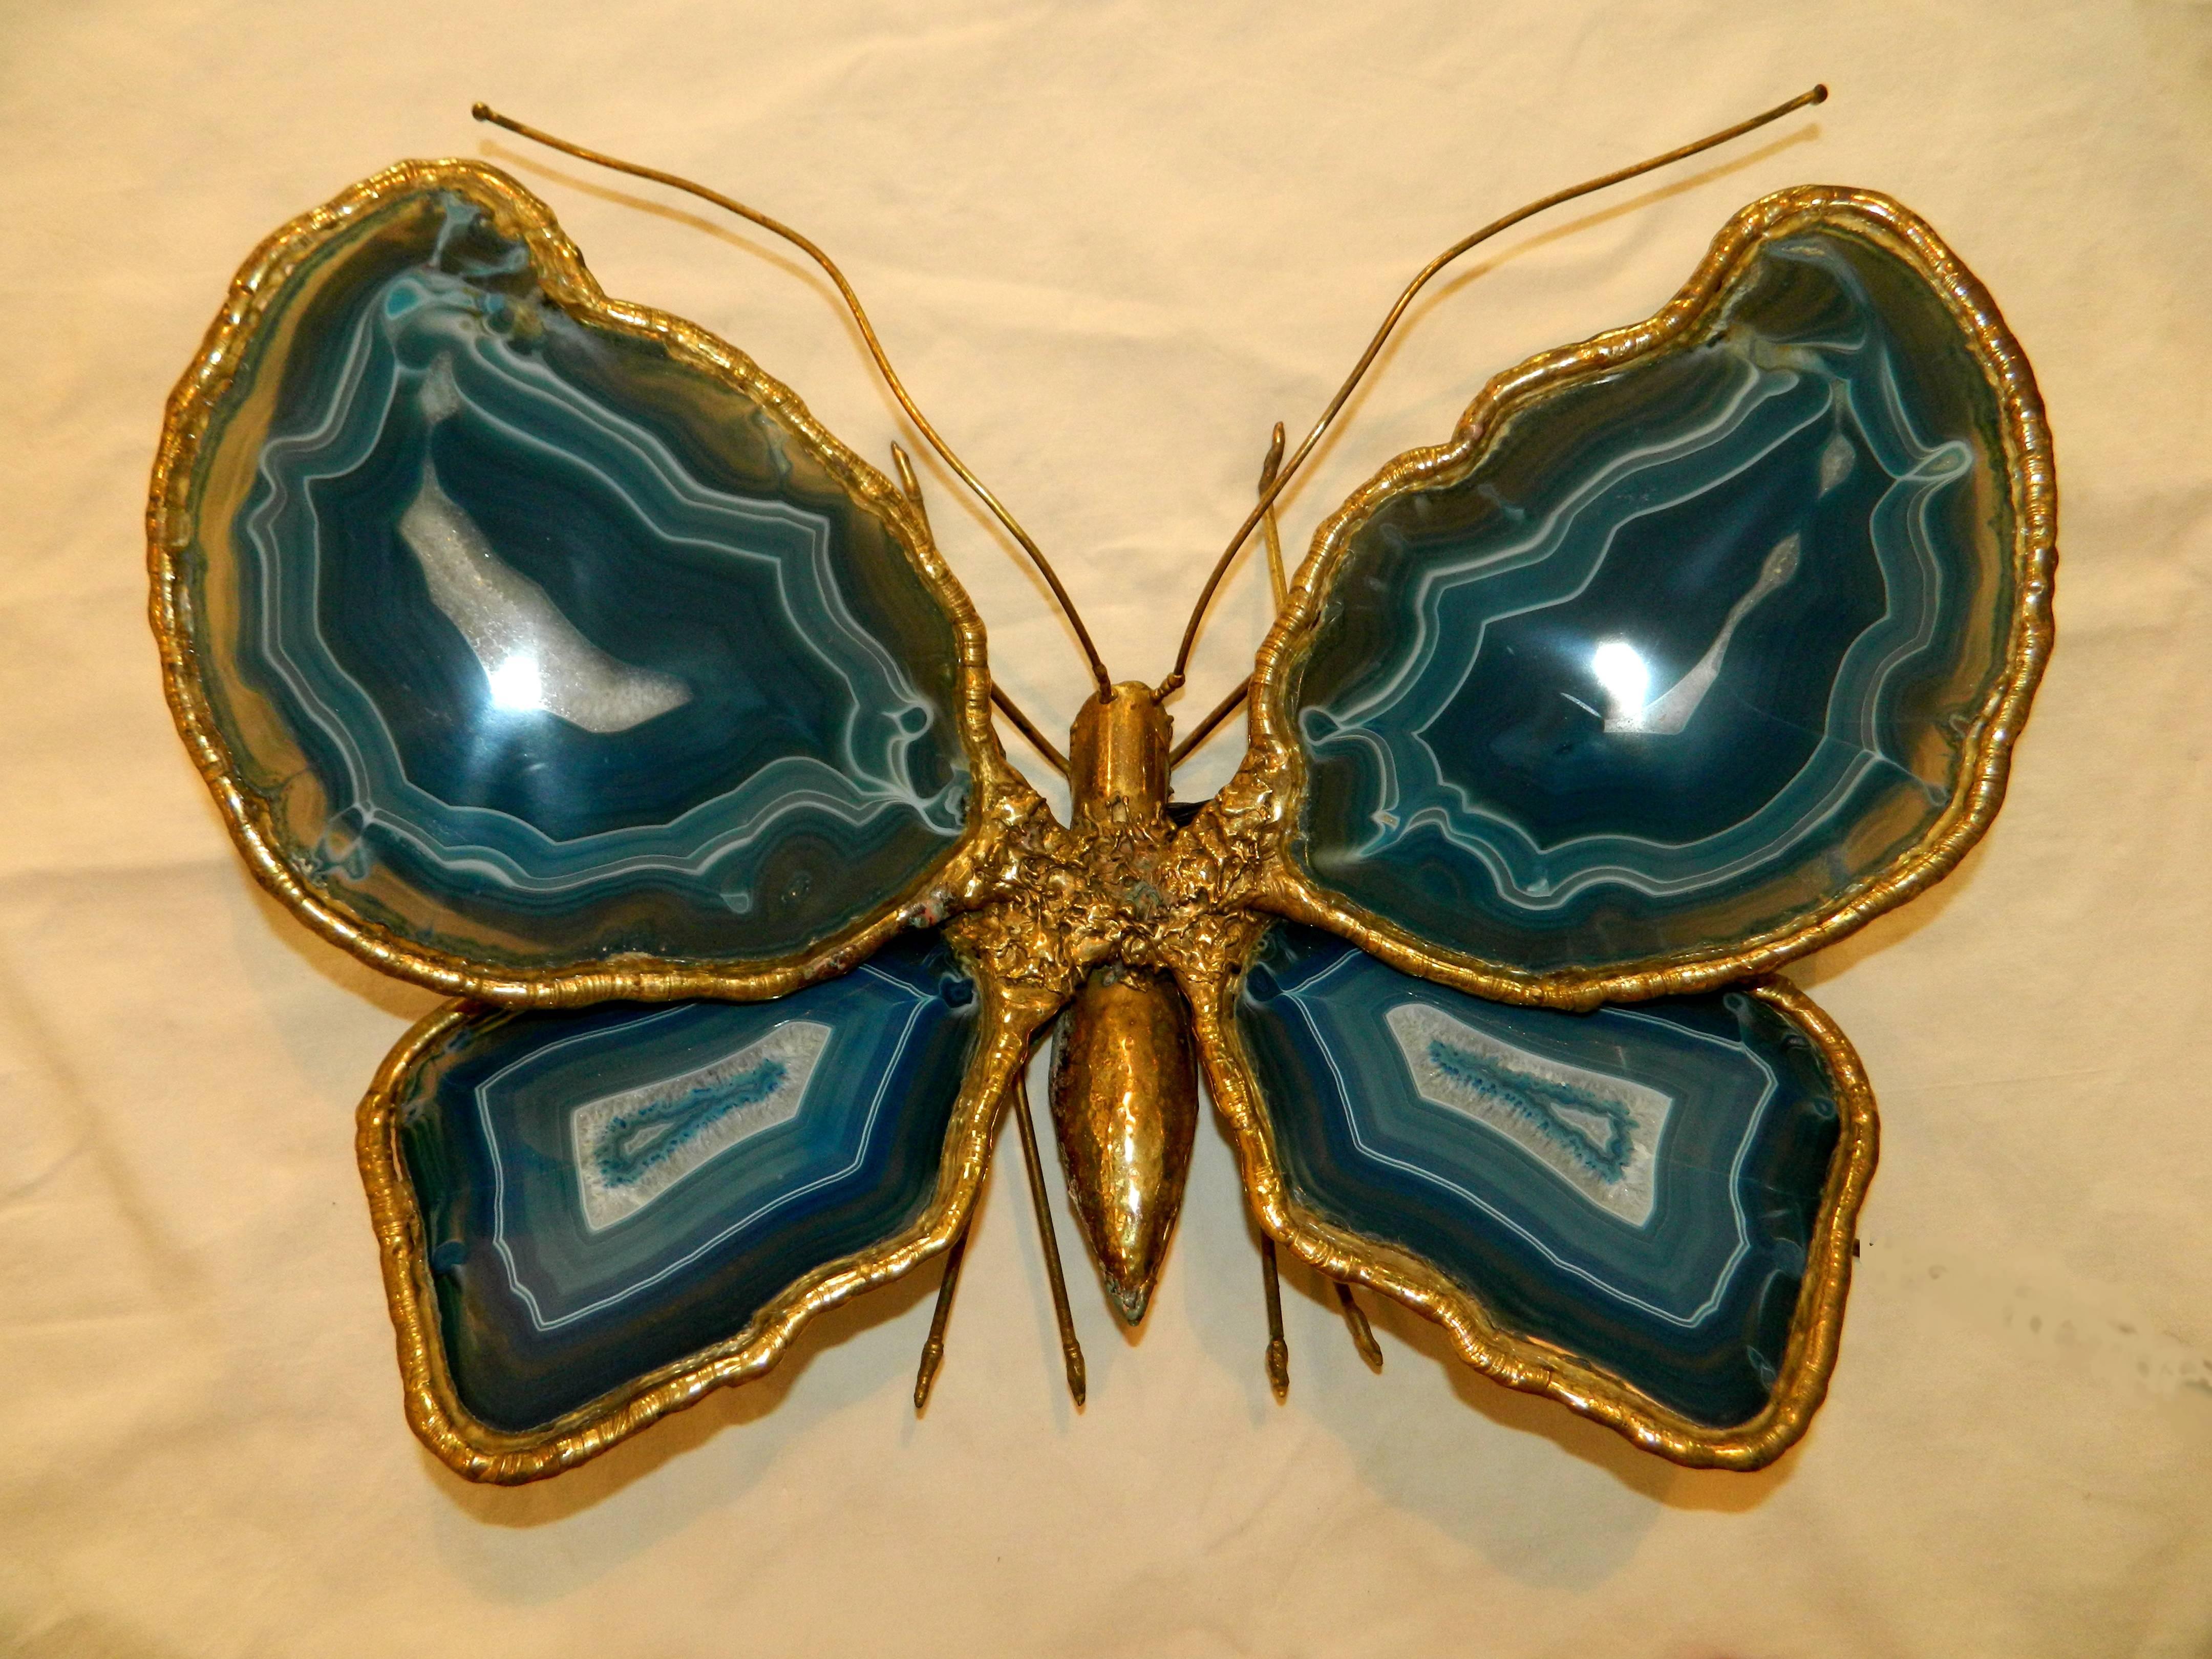 Bronze Butterfly Sculpture by Jacques Duval-Brasseur 1